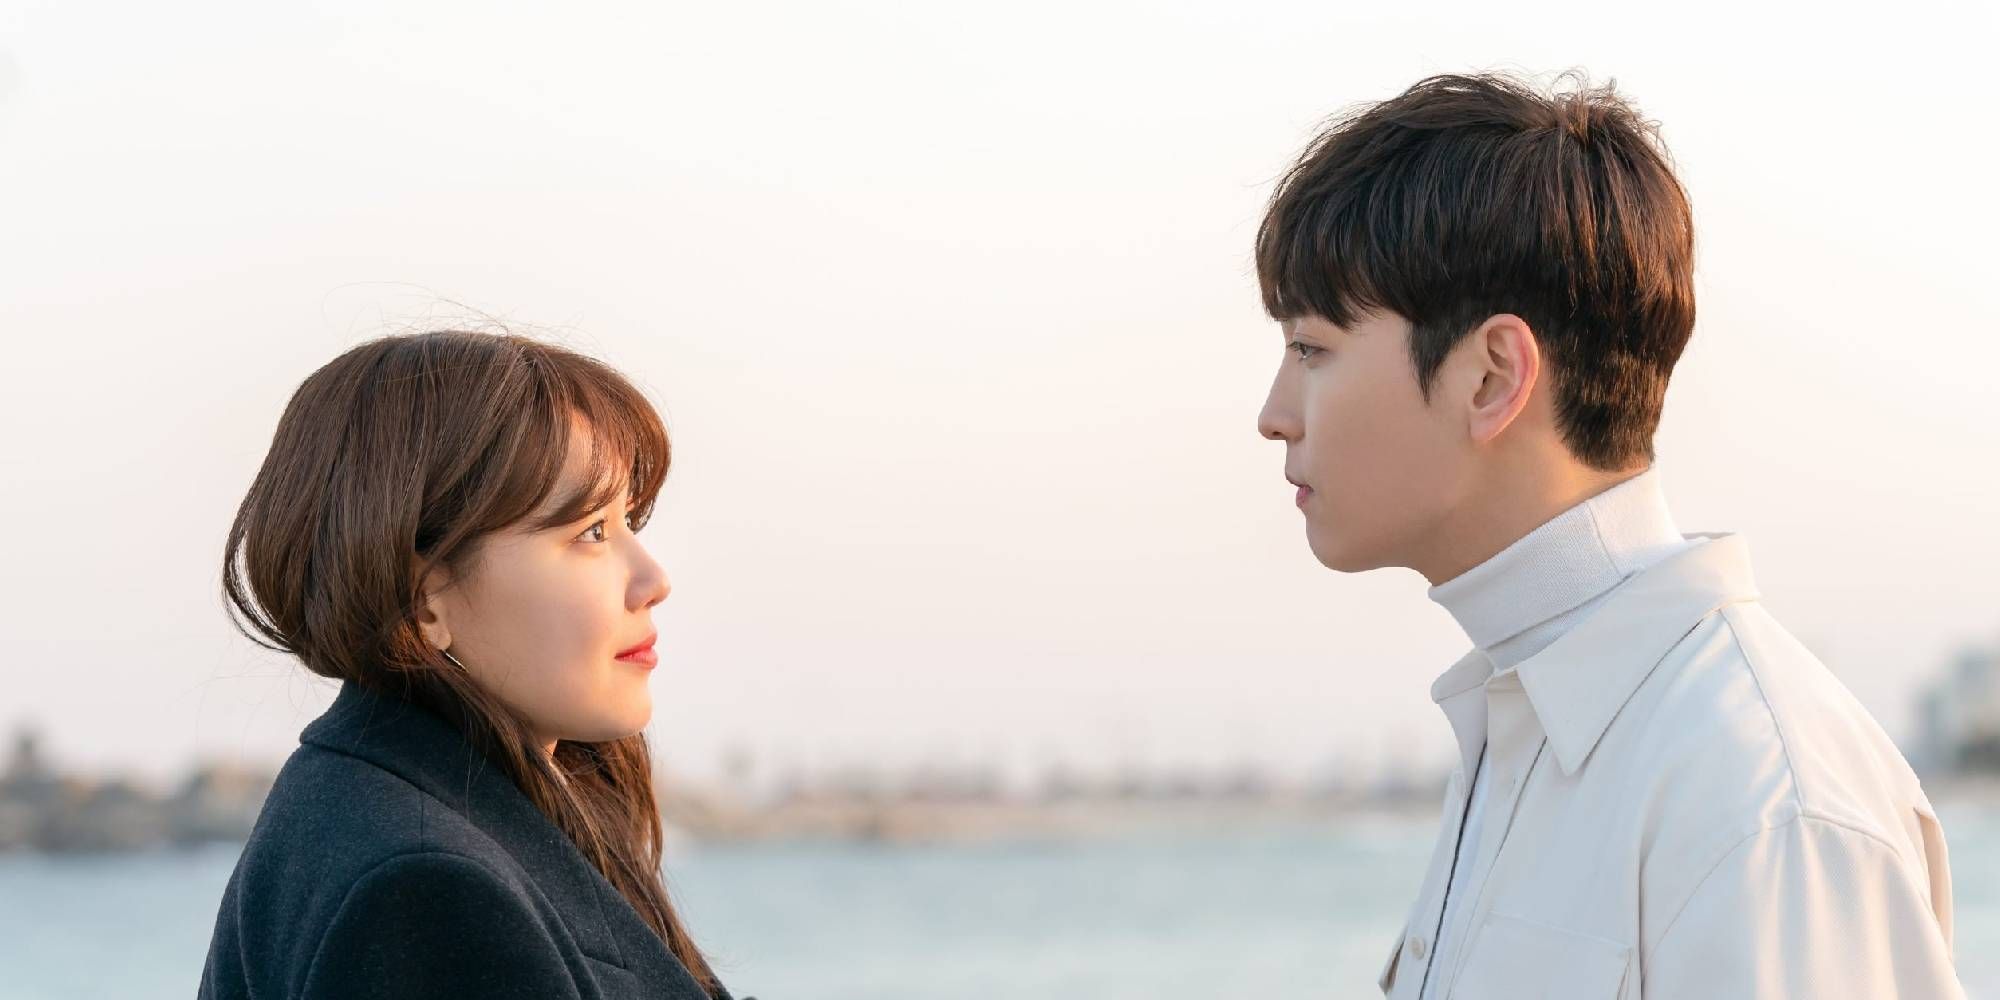 4 Reasons To Watch Gorgeous, Heart-Wrenching C-Drama “The